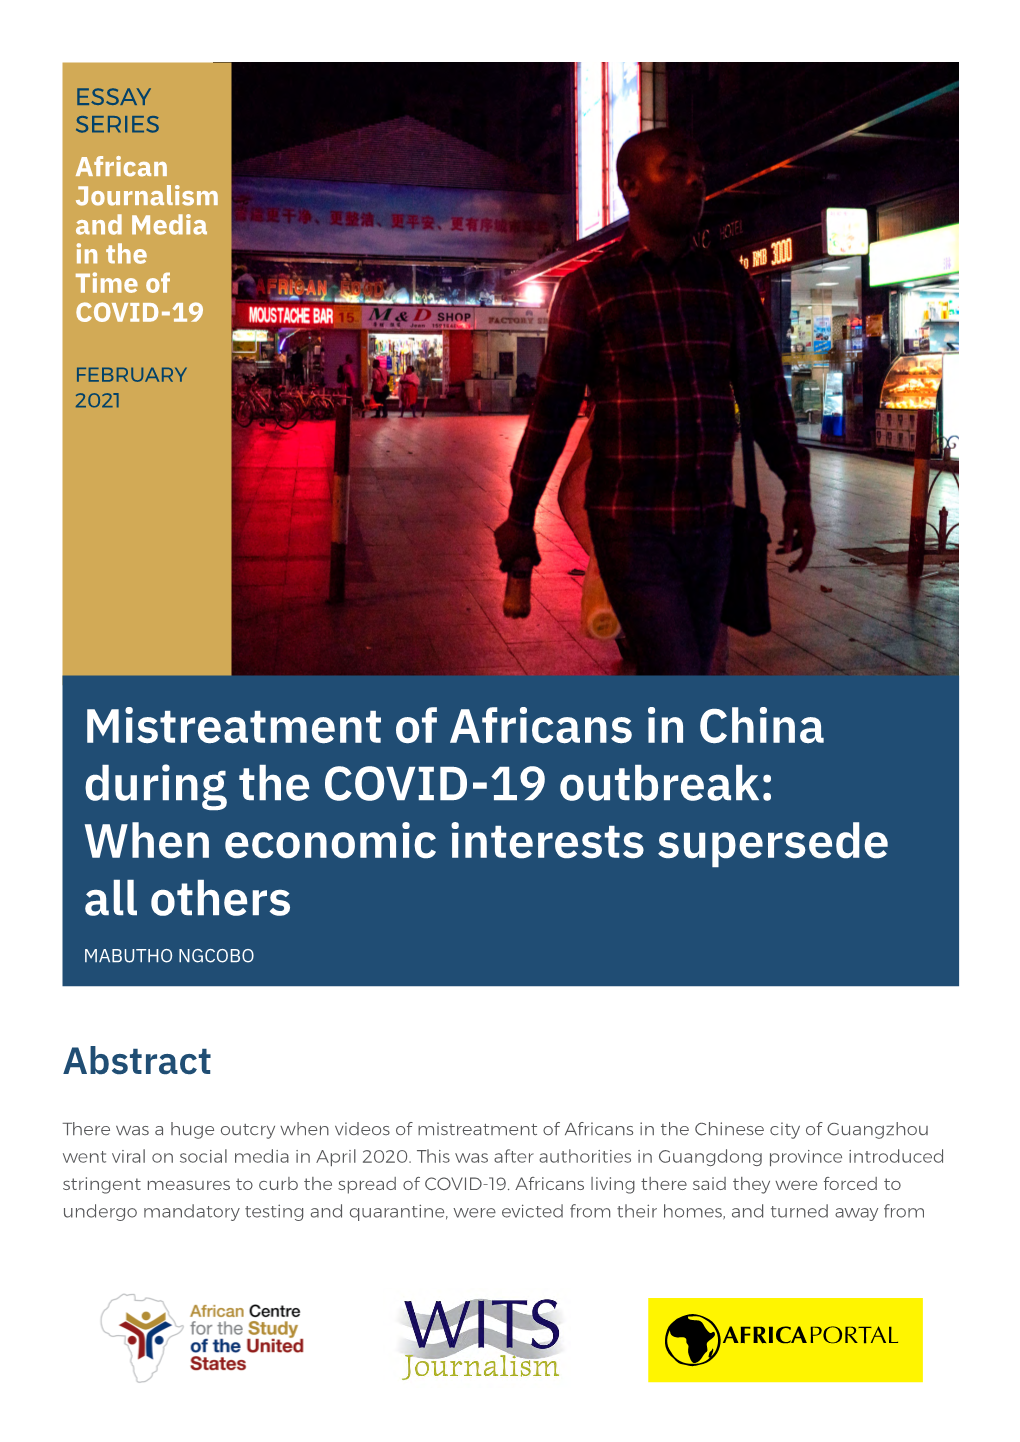 Mistreatment of Africans in China During the COVID-19 Outbreak: When Economic Interests Supersede All Others